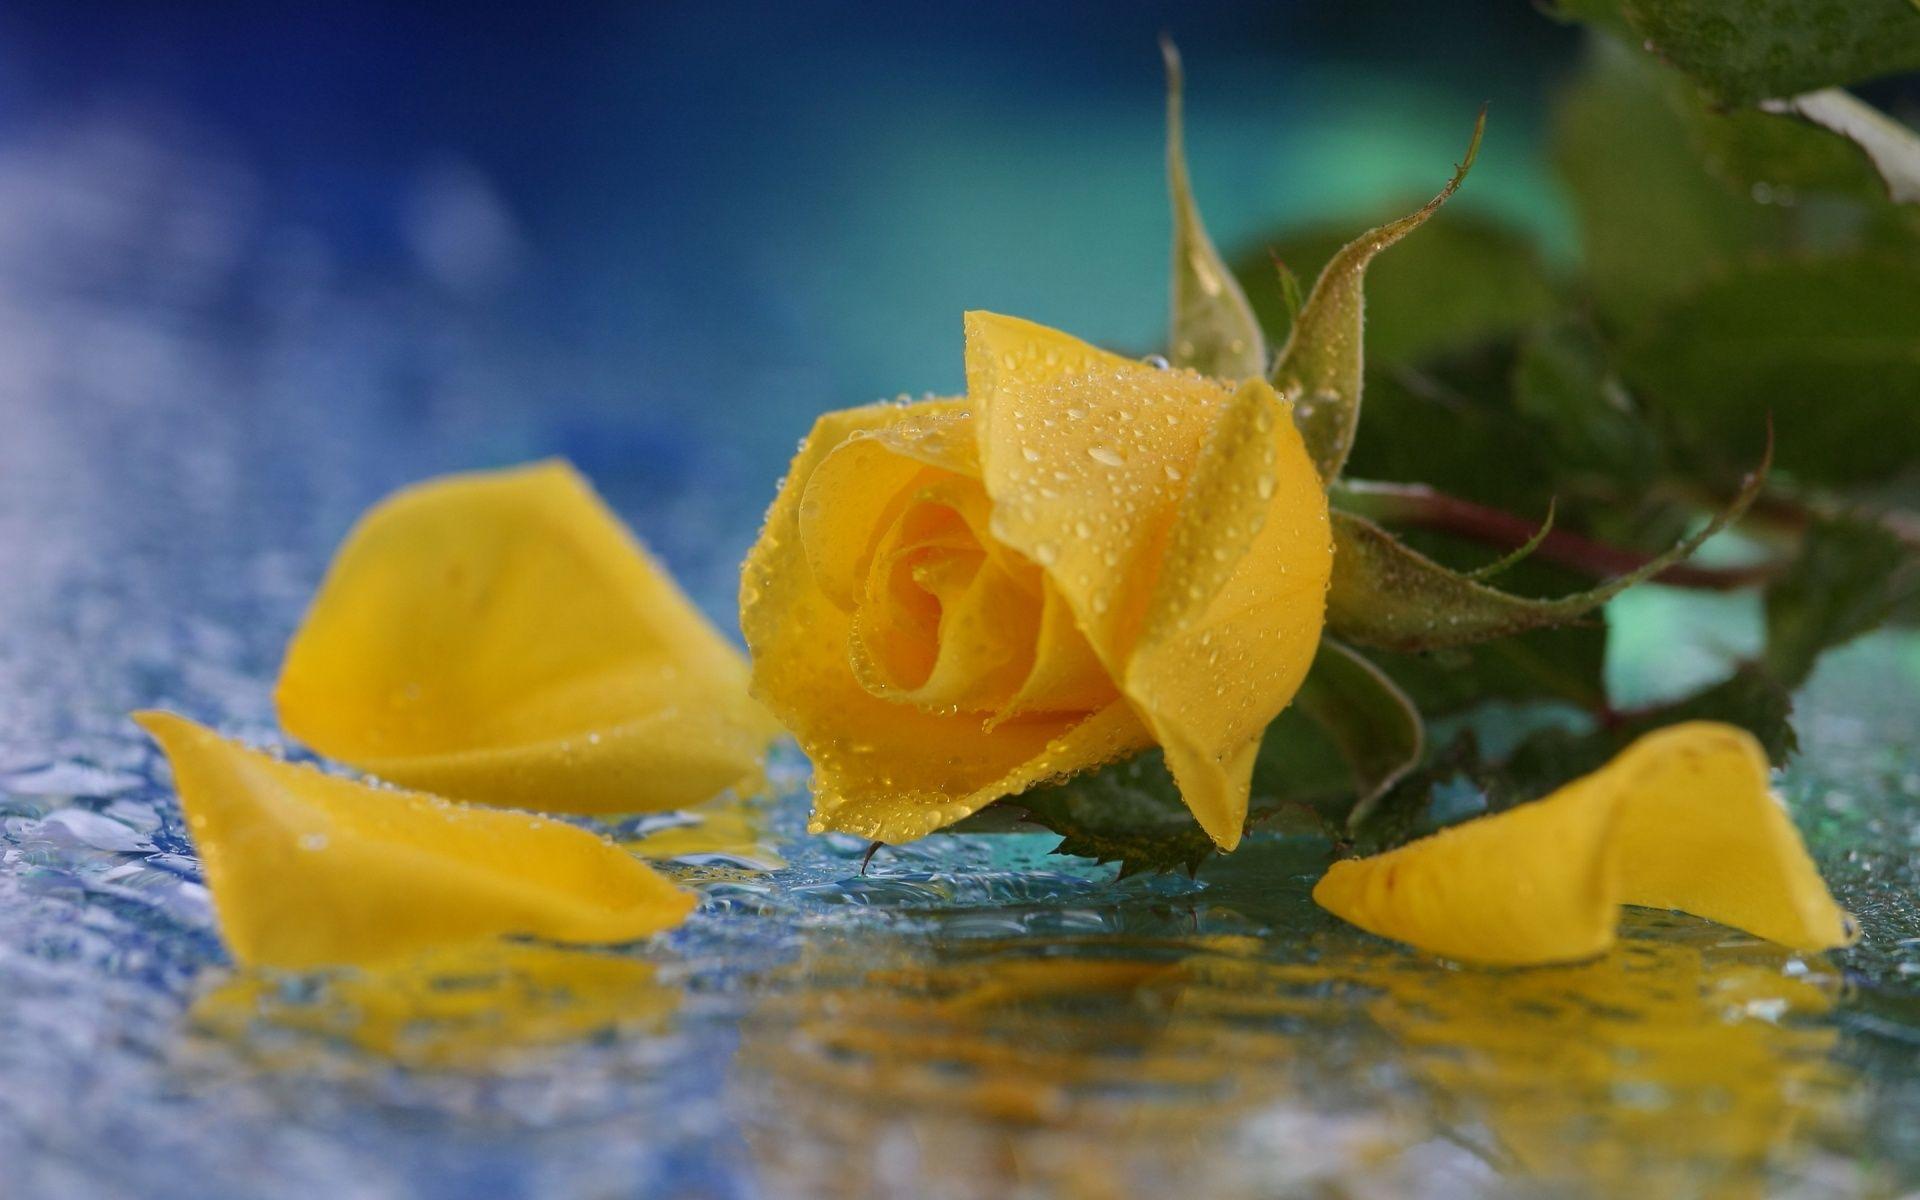 Yellow Roses Wallpapers - Wallpaper Cave